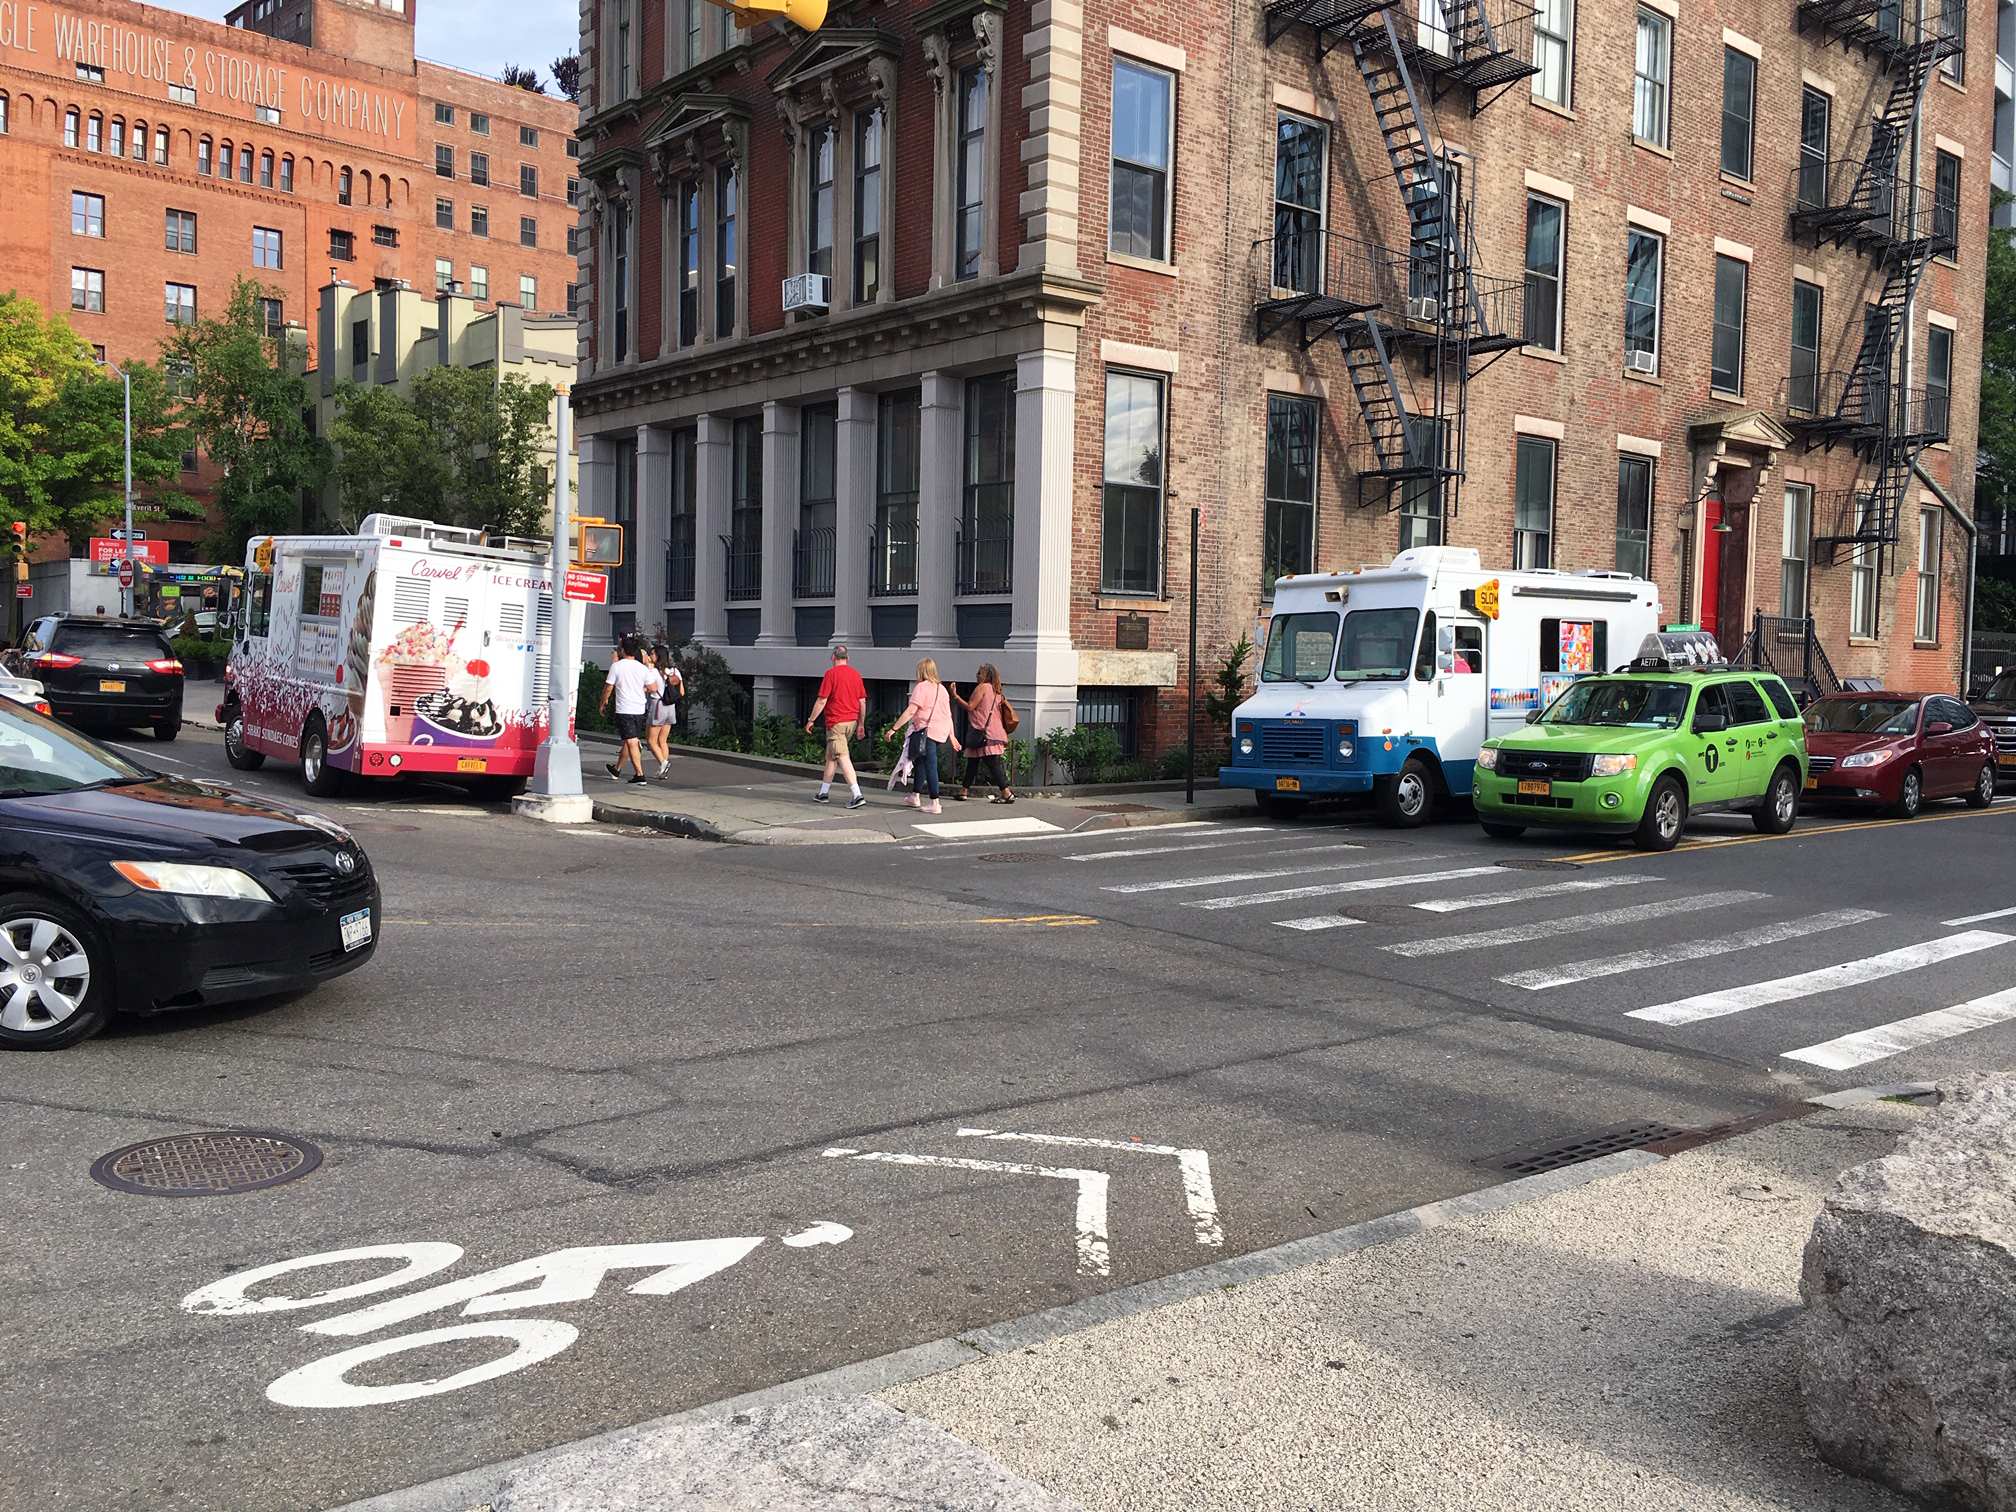 Competing ice cream trucks on Old Fulton Street in the Fulton Ferry Historic District. Photo courtesy of Bill Stein